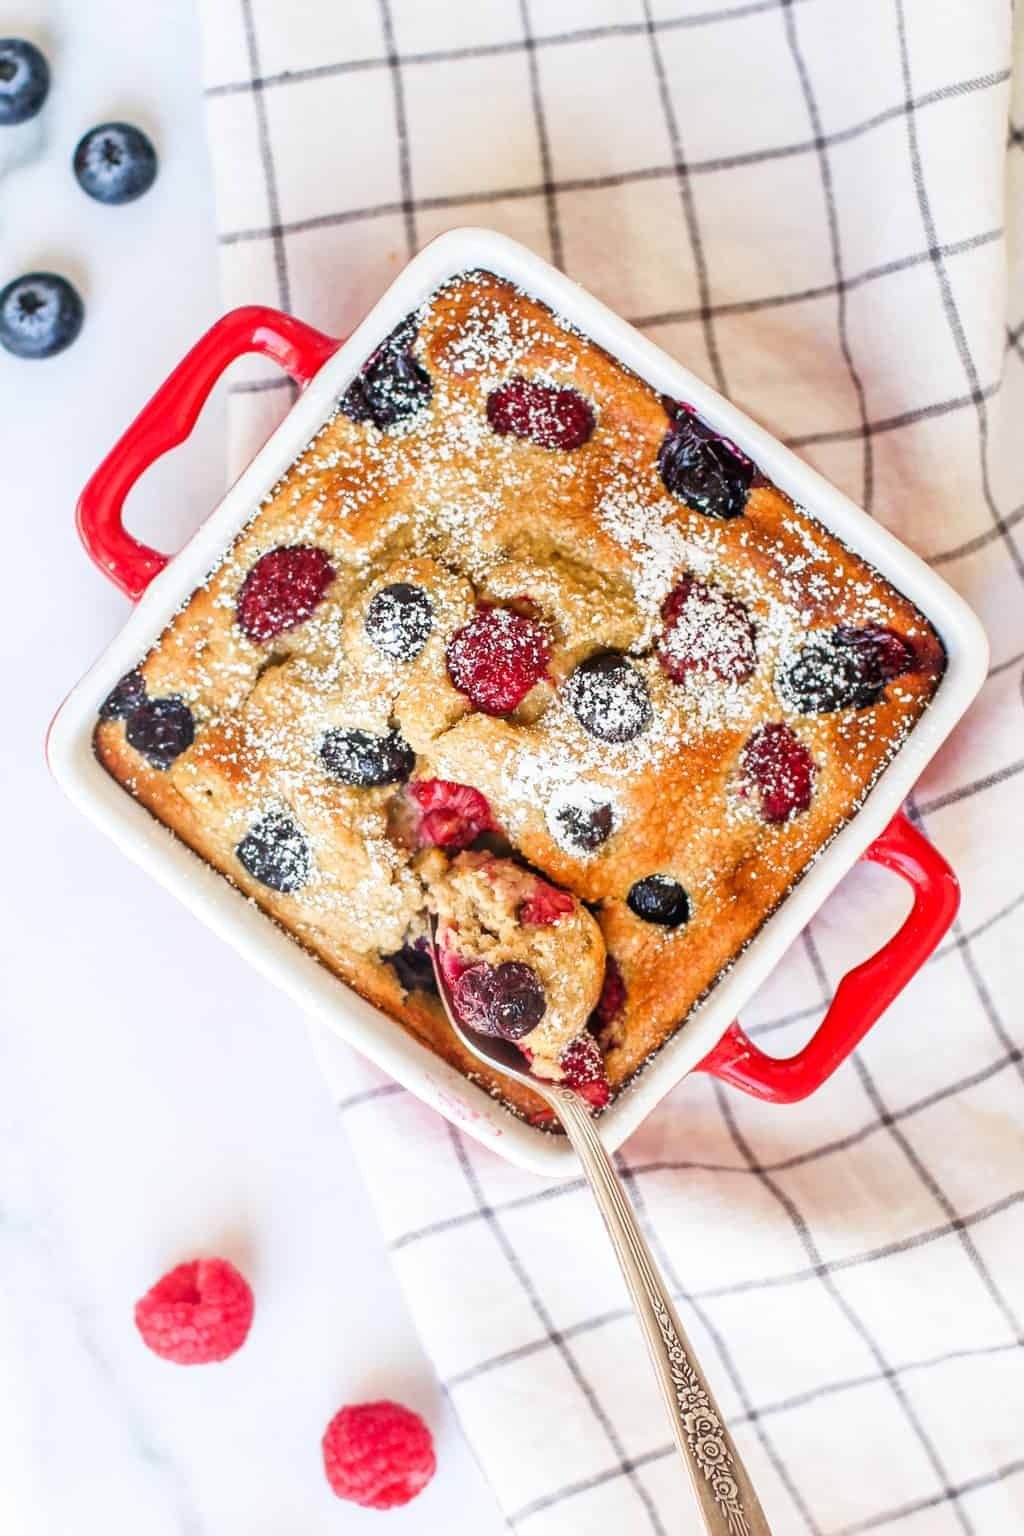 Baked Oats with Blueberries & Raspberries